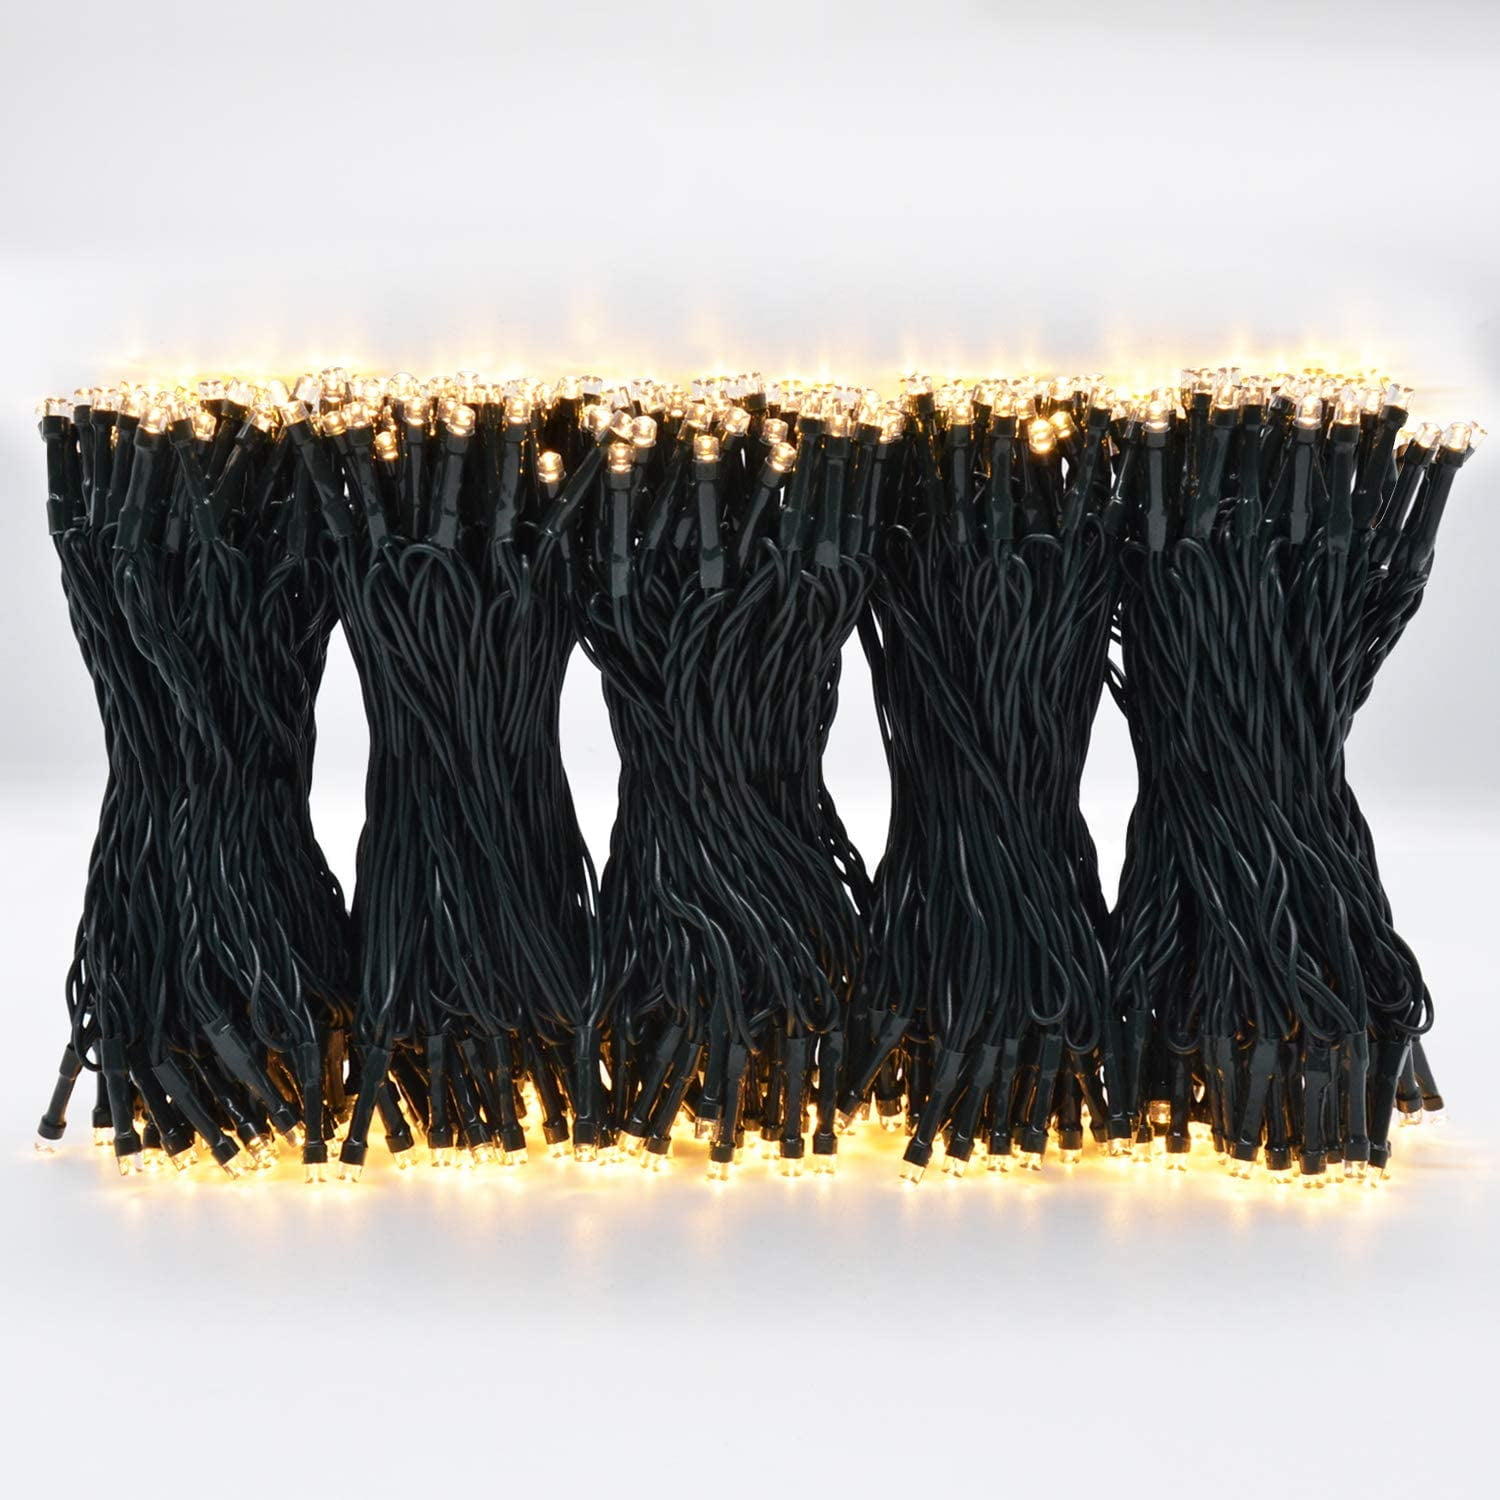 216/432 LED 8 Modes Plug In Warm White String Lights Indoor/Outdoor Christmas 